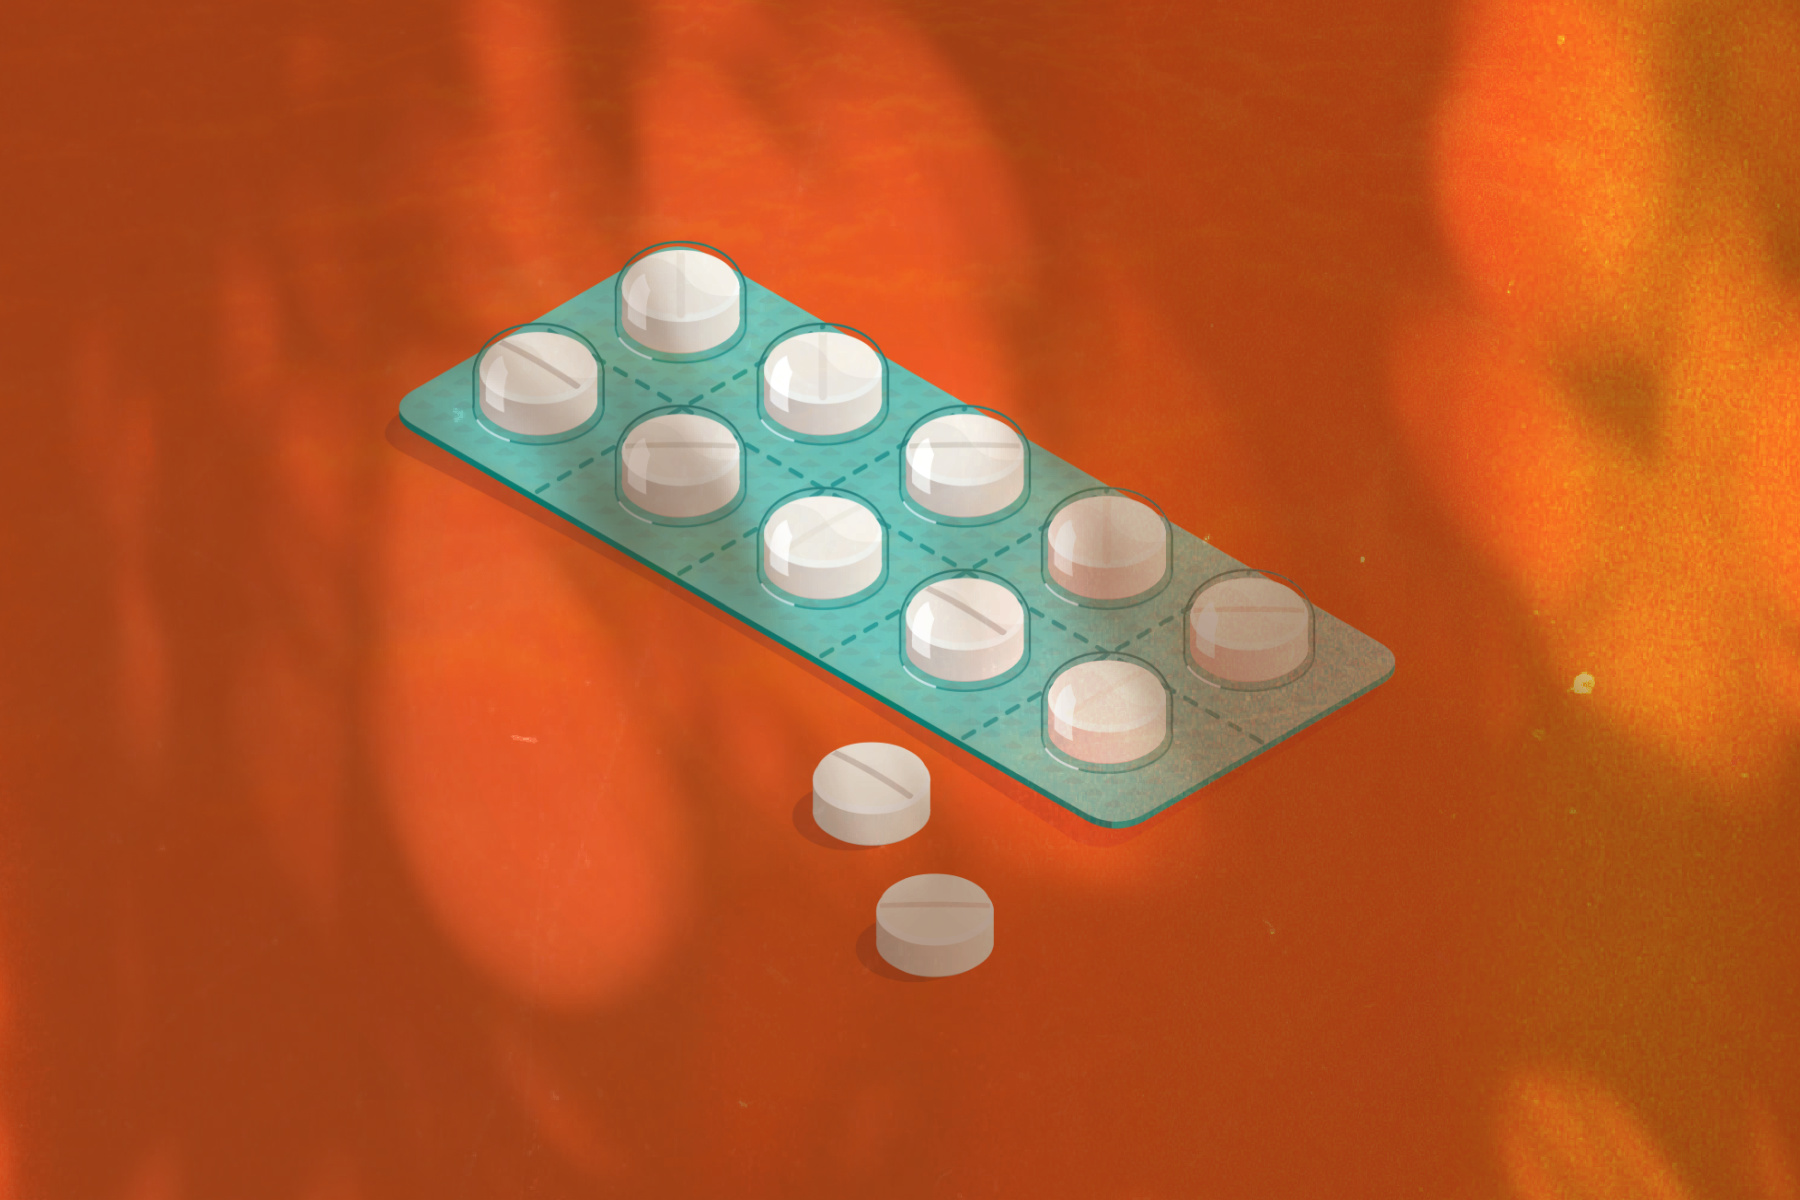 An illustration of birth control pills against a bright orange background.